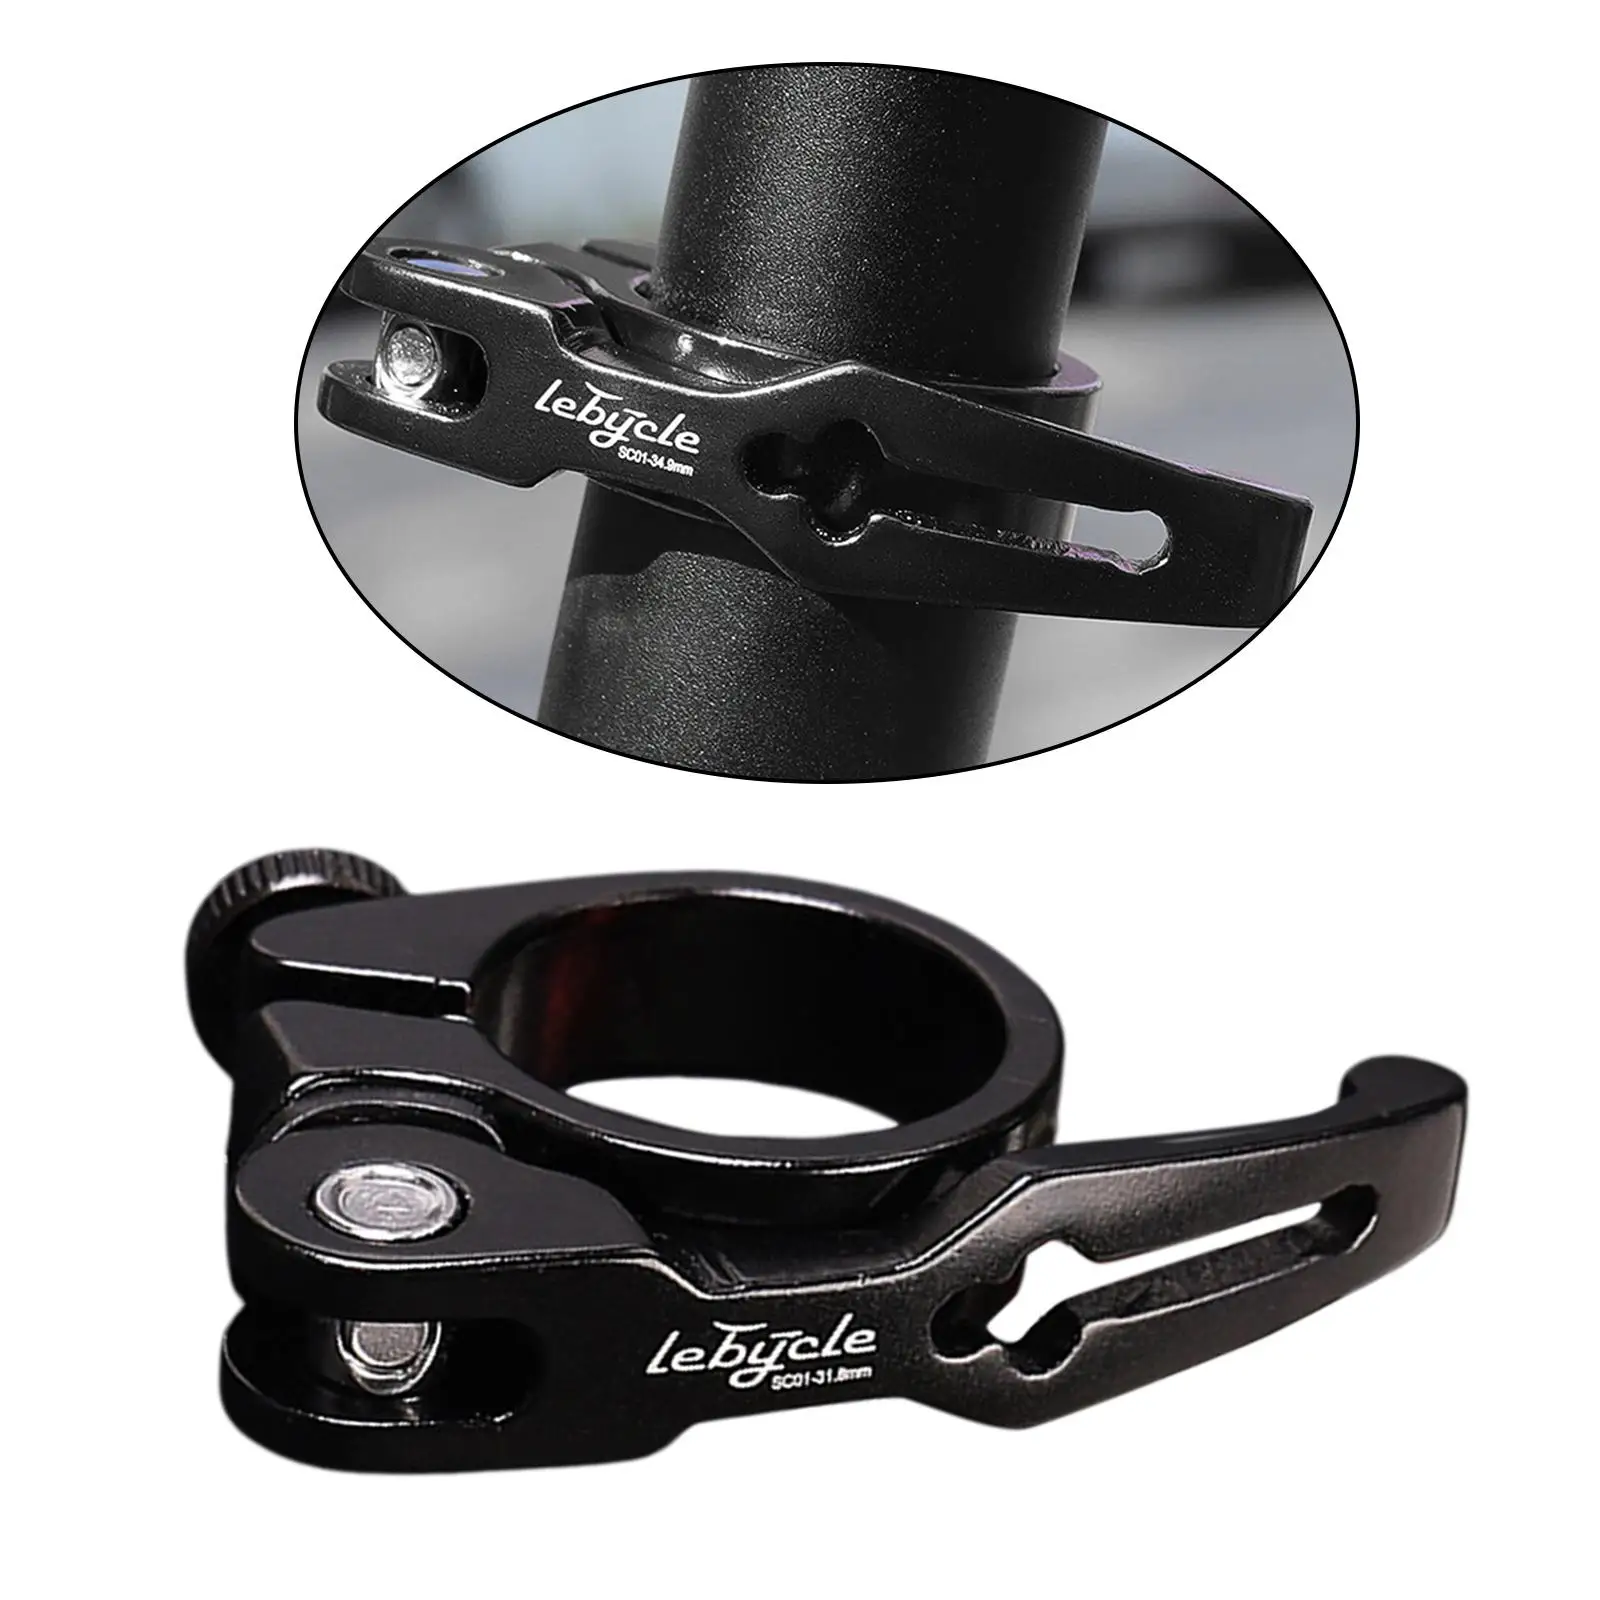 Alloy Bike Seatpost Clamp Bicycle Cycling Tube Seat Post Clip Equipment